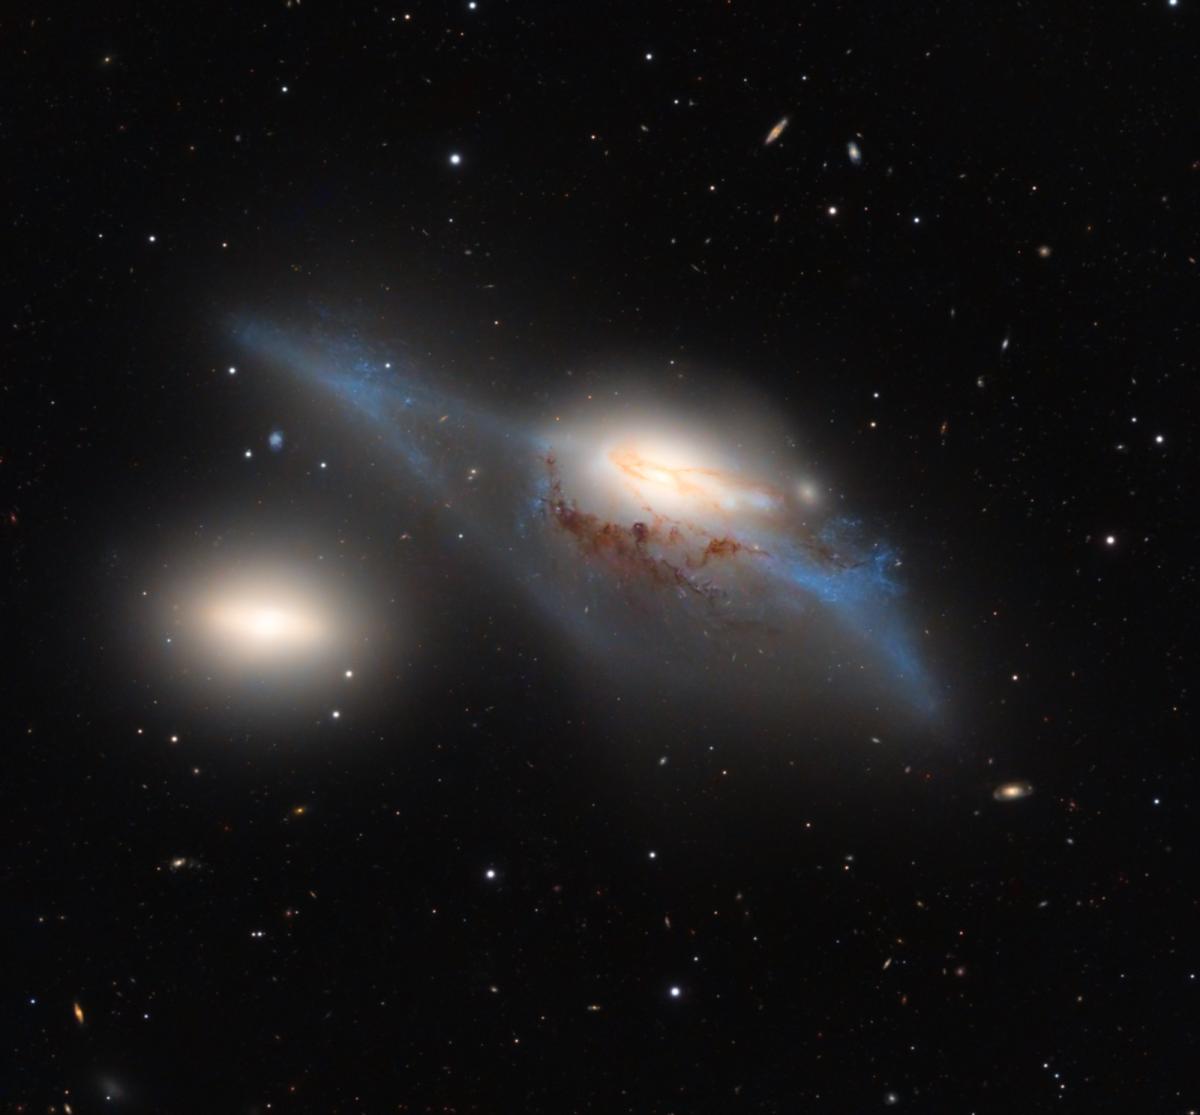 Image of a galaxy with dust detail